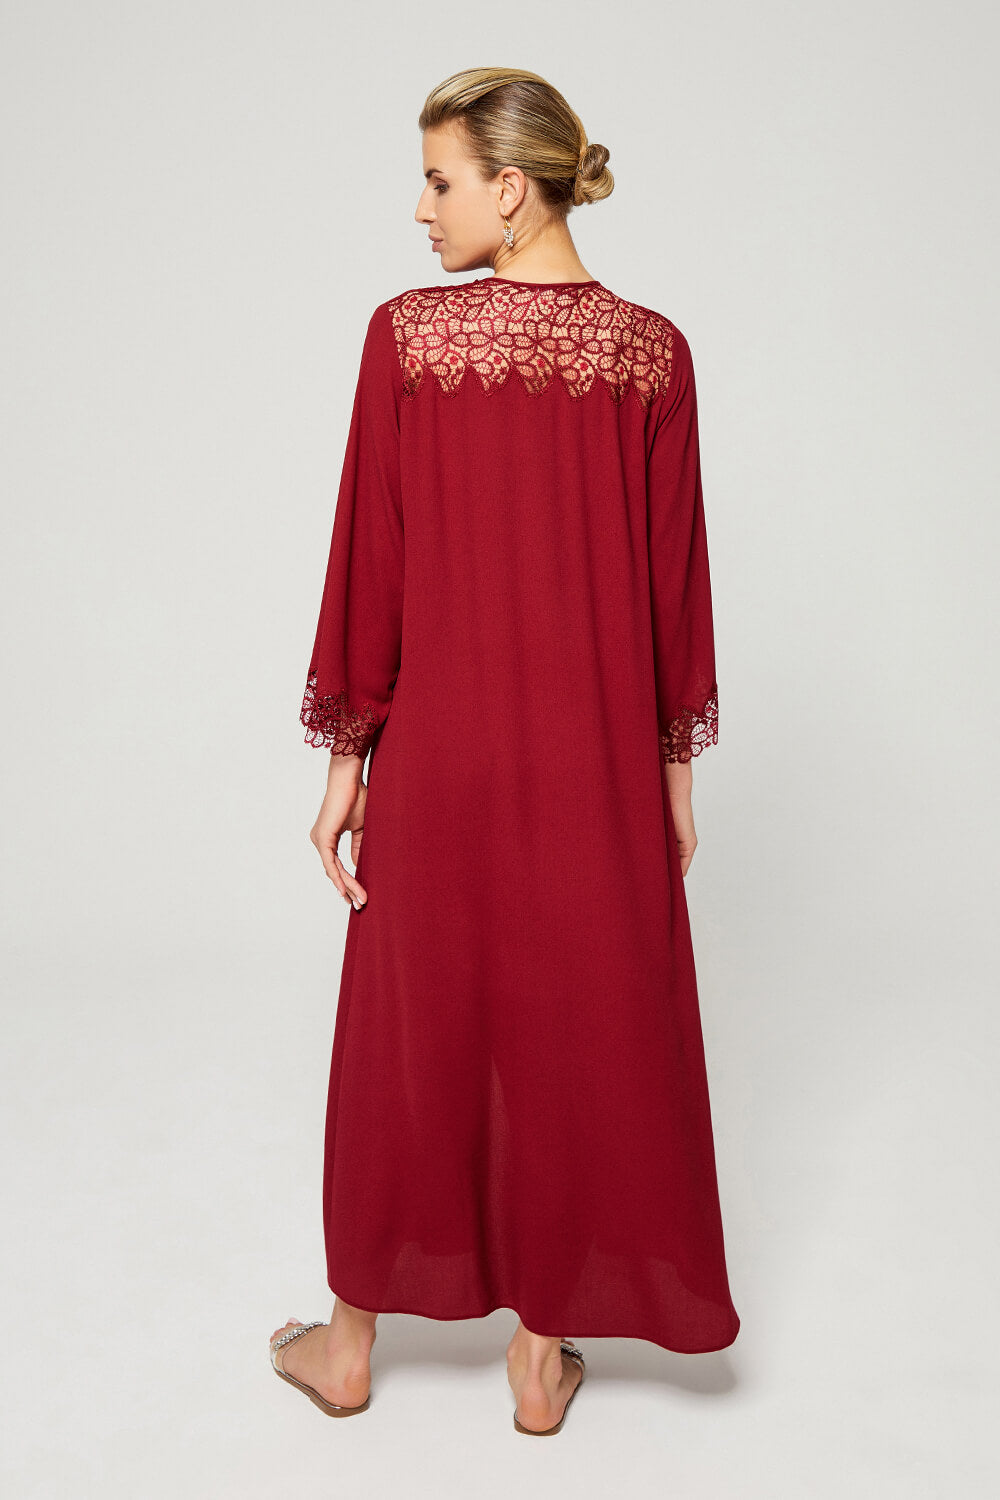 Margaux- Luxury Trimmed Rayon Crepe Full Length Dress with Zipper - Bordeaux Red